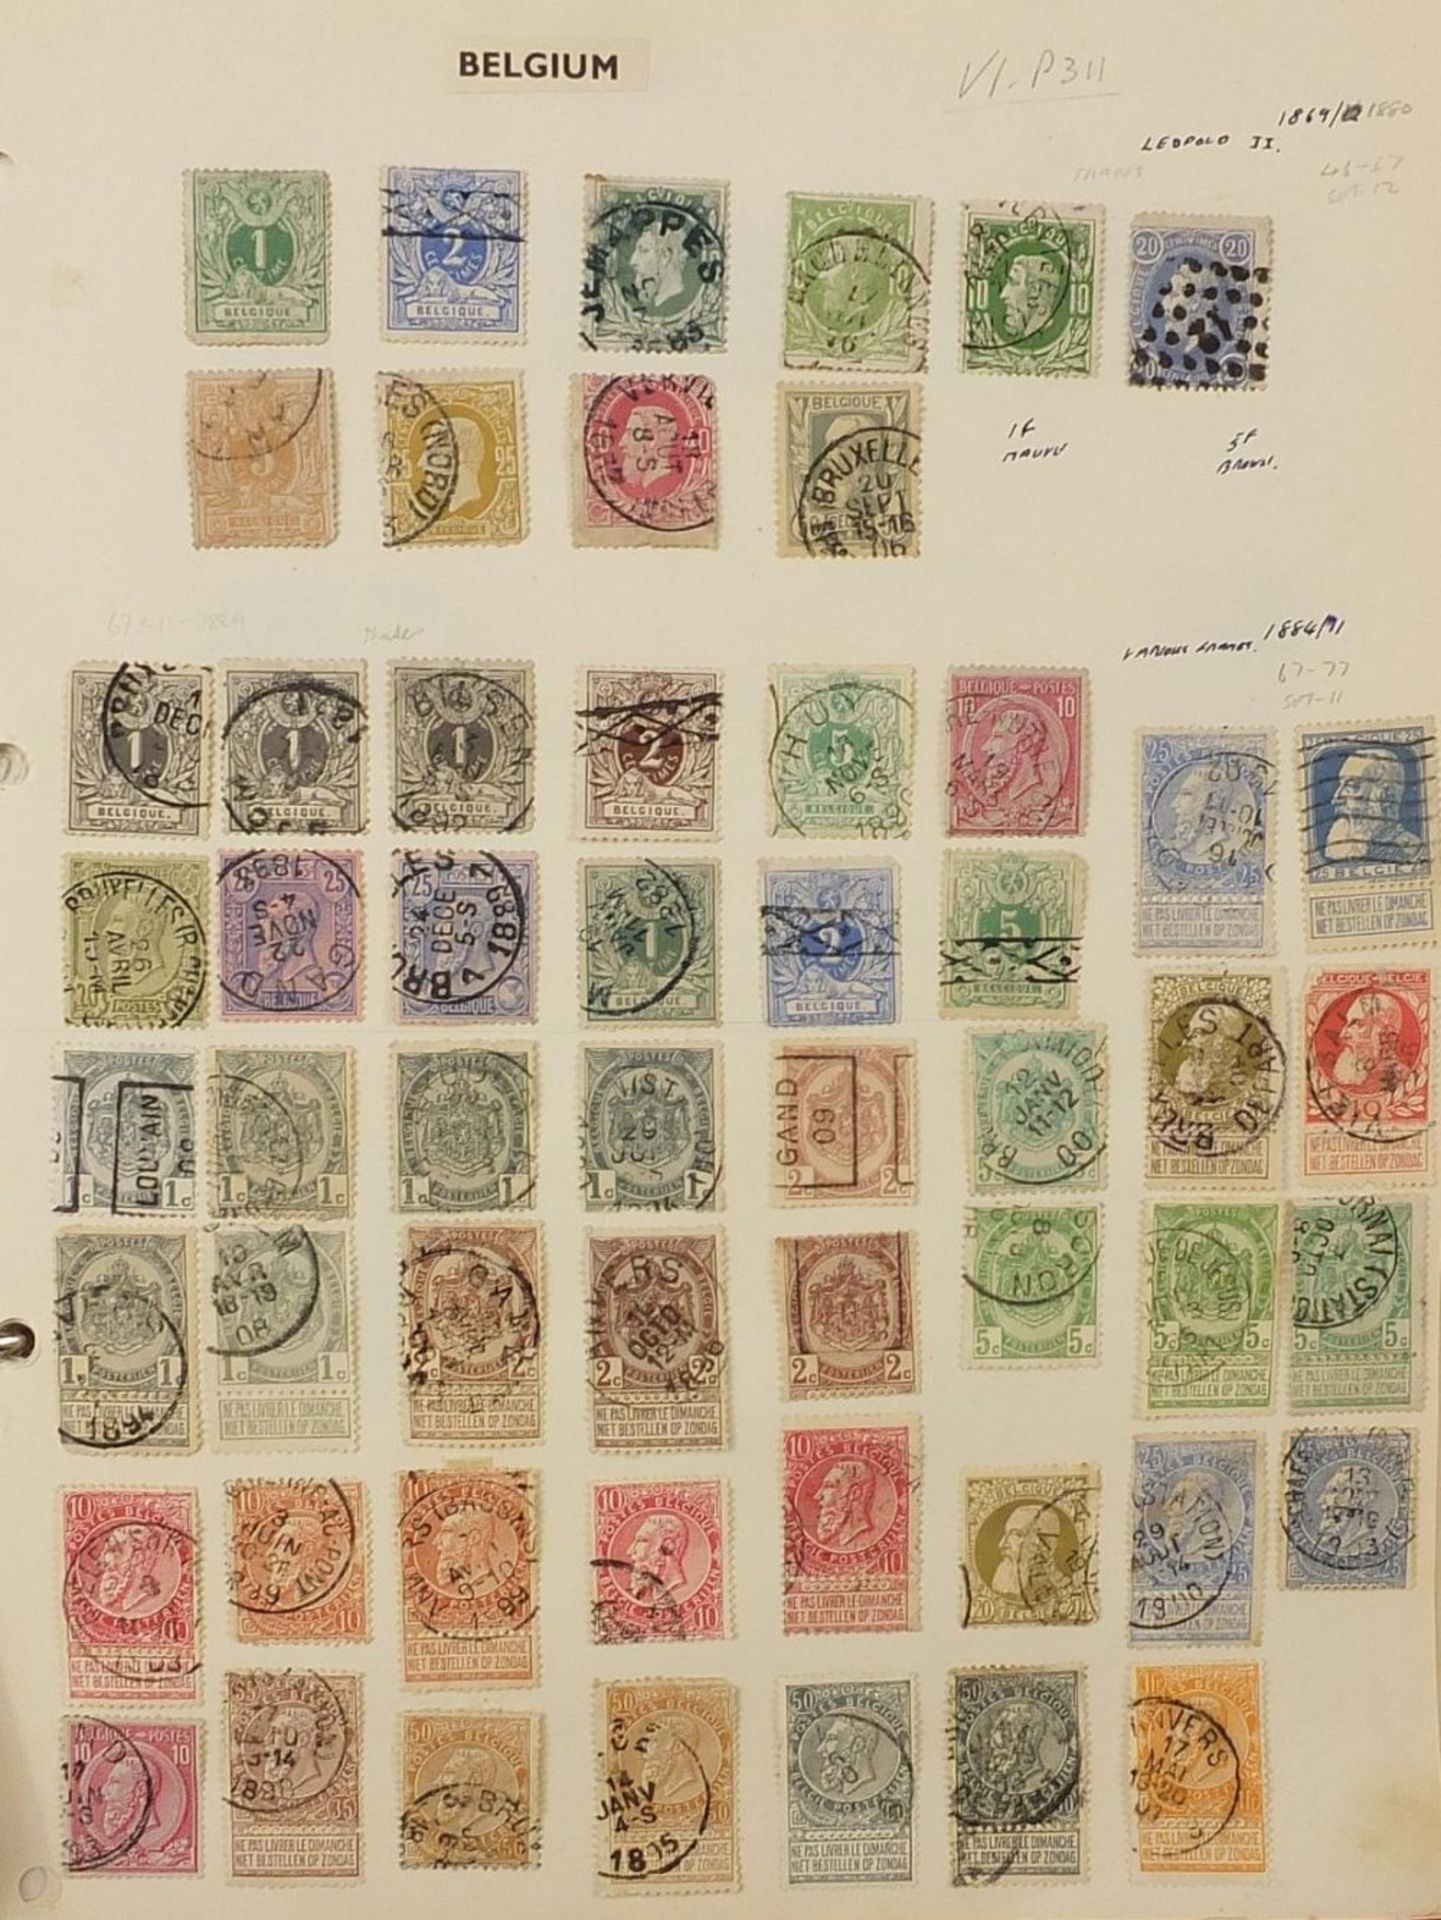 Extensive collection of antique and later world stamps arranged in albums including Brazil, - Image 42 of 52